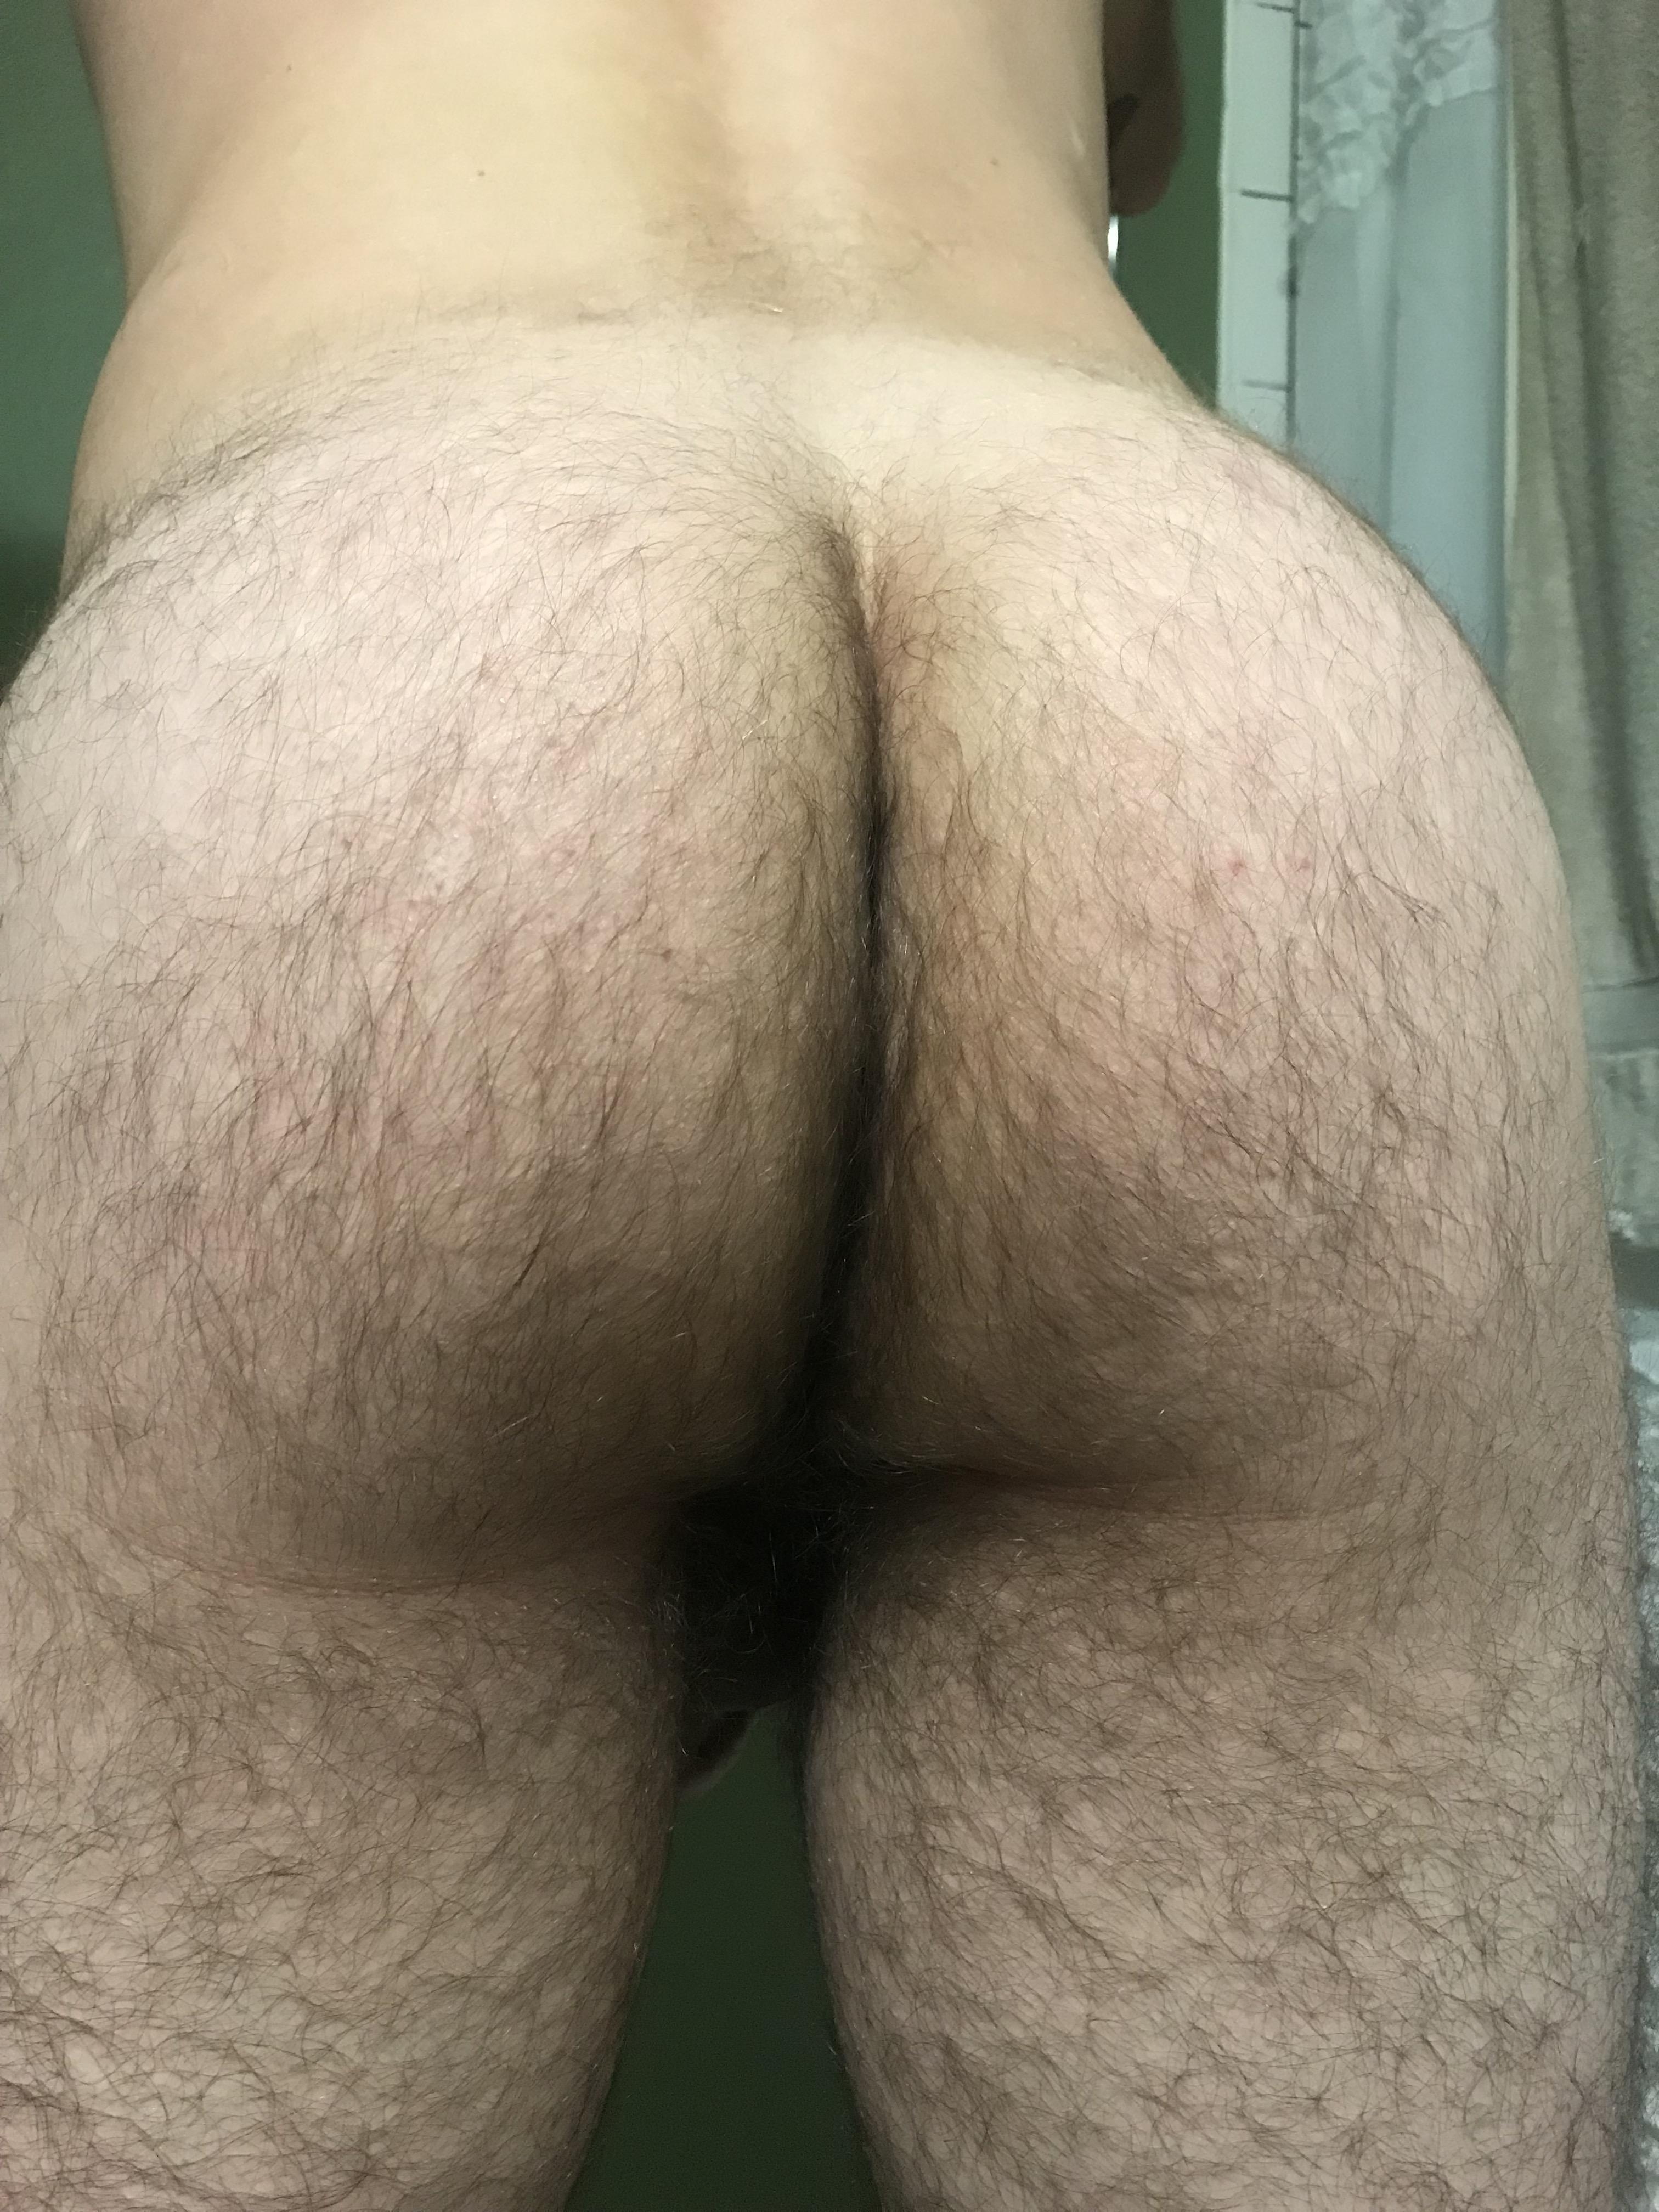 Since y’all seem to enjoy my ass so much, here’s another. Enjoy!